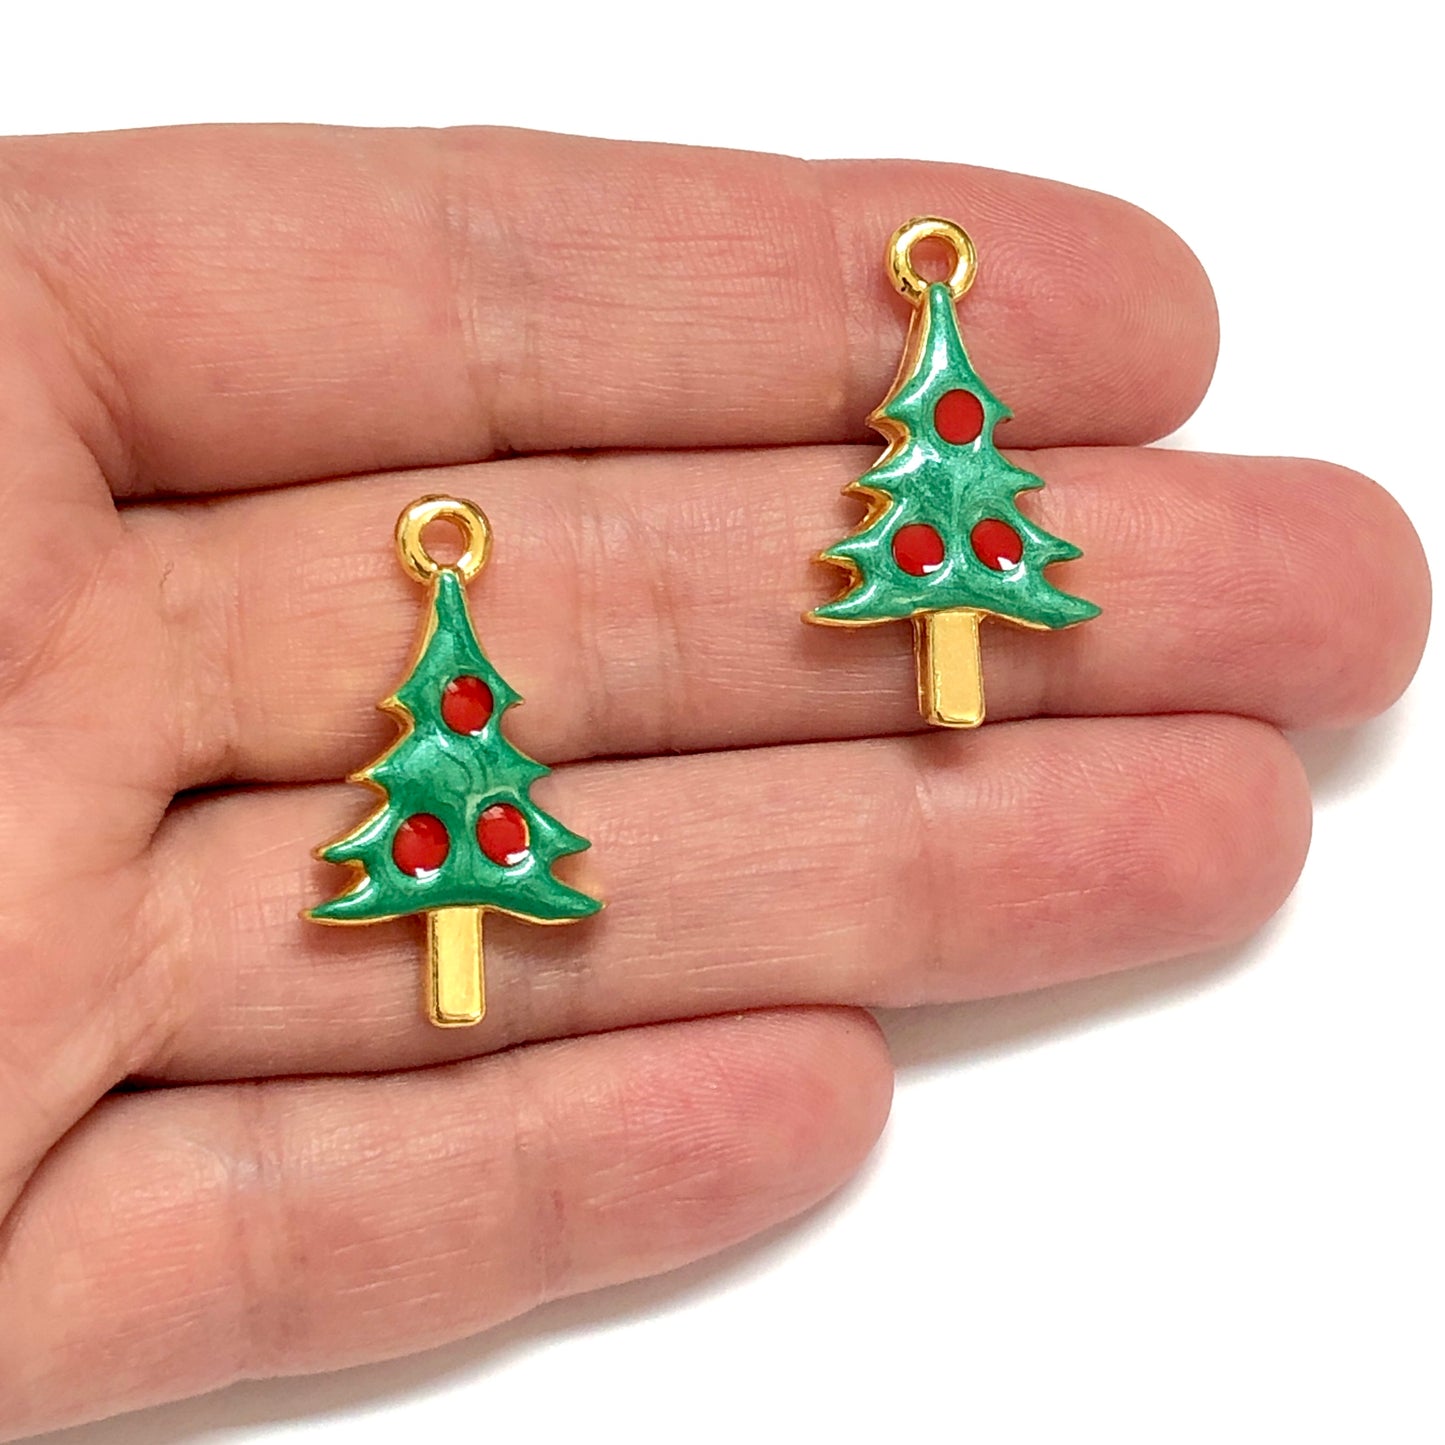 New Year Objects - Pine Tree